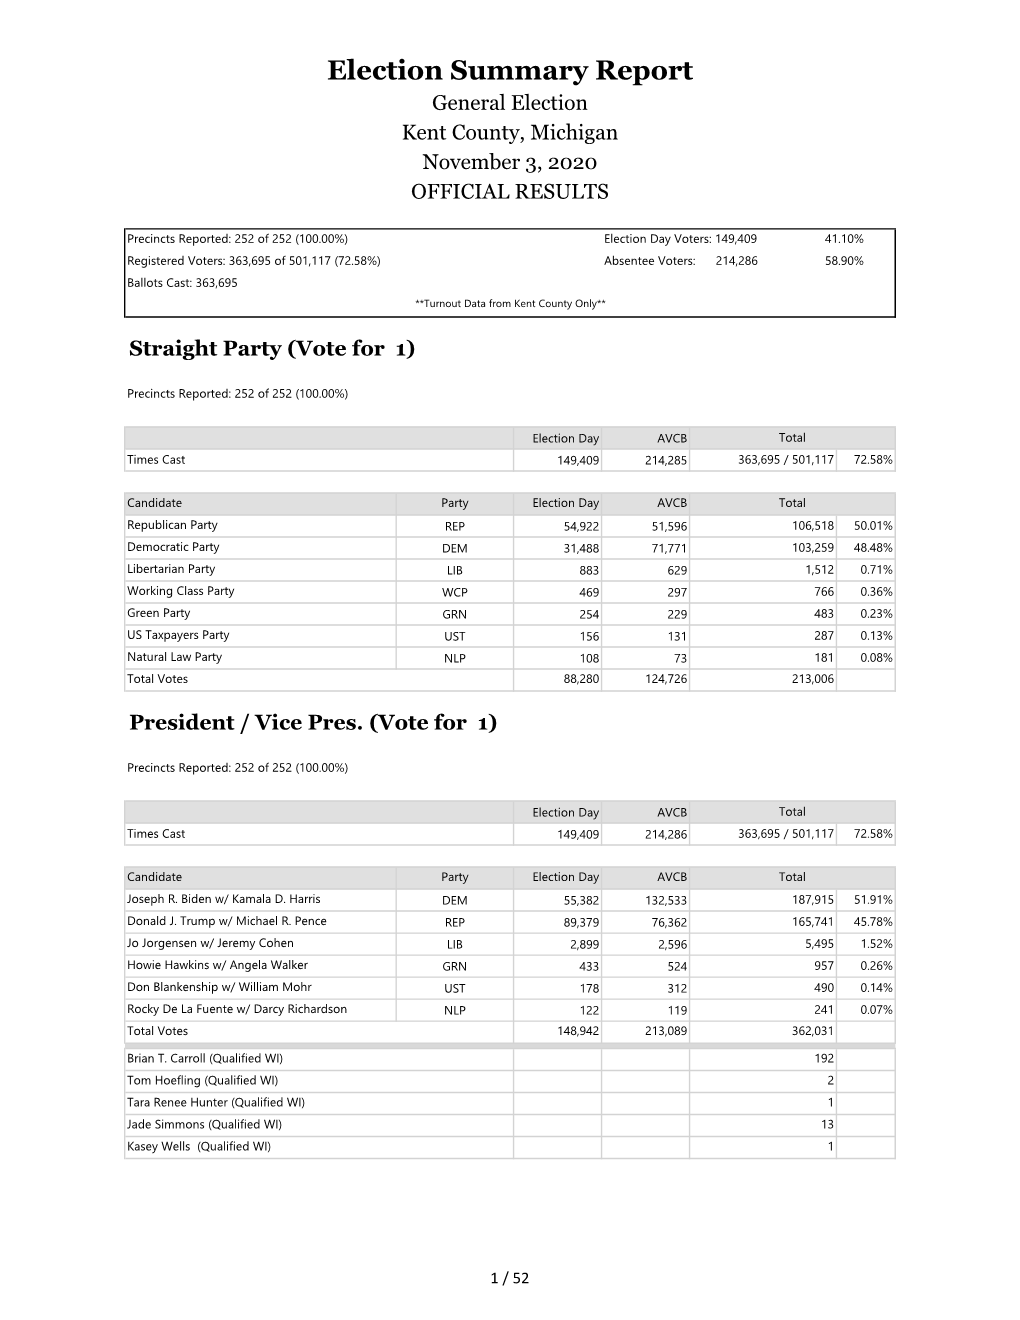 Election Summary Report General Election Kent County, Michigan November 3, 2020 OFFICIAL RESULTS